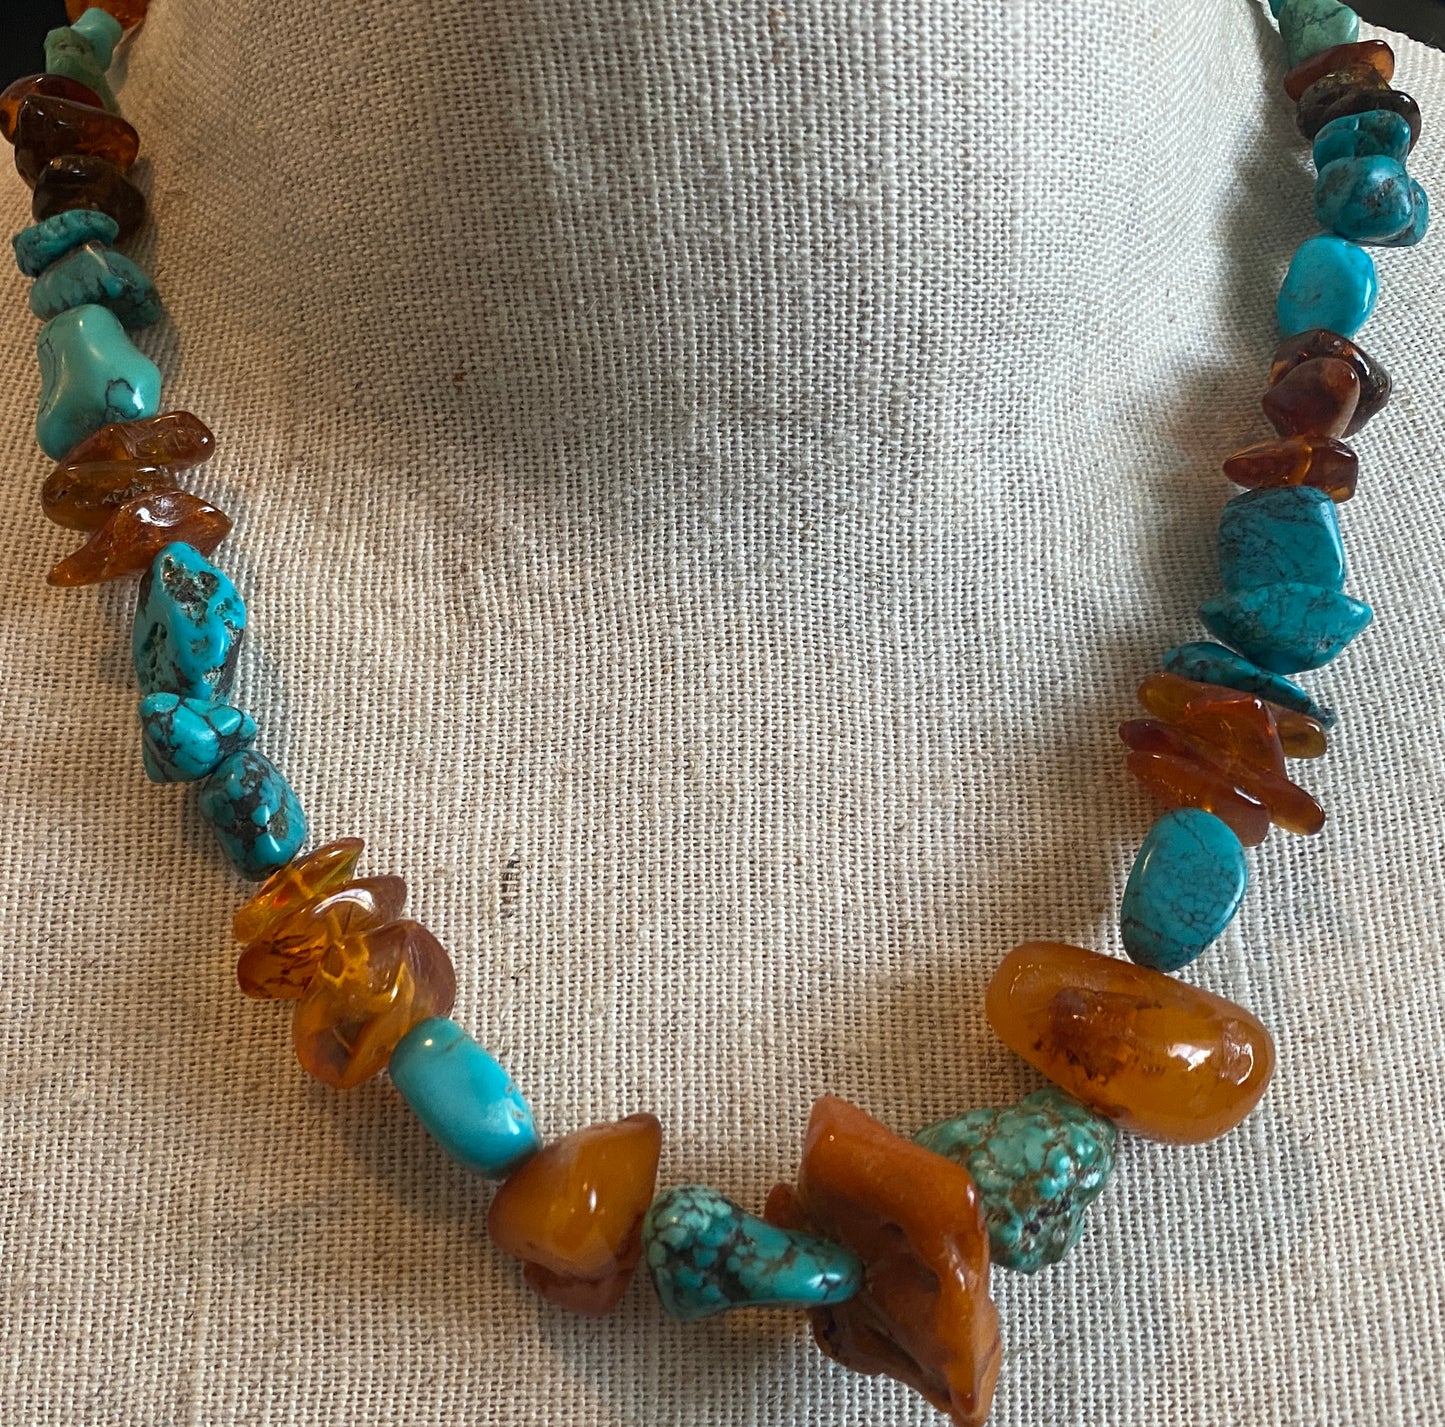 Sterling Silver 925 Turquoise Faux Amber Bead Necklace Adjustable